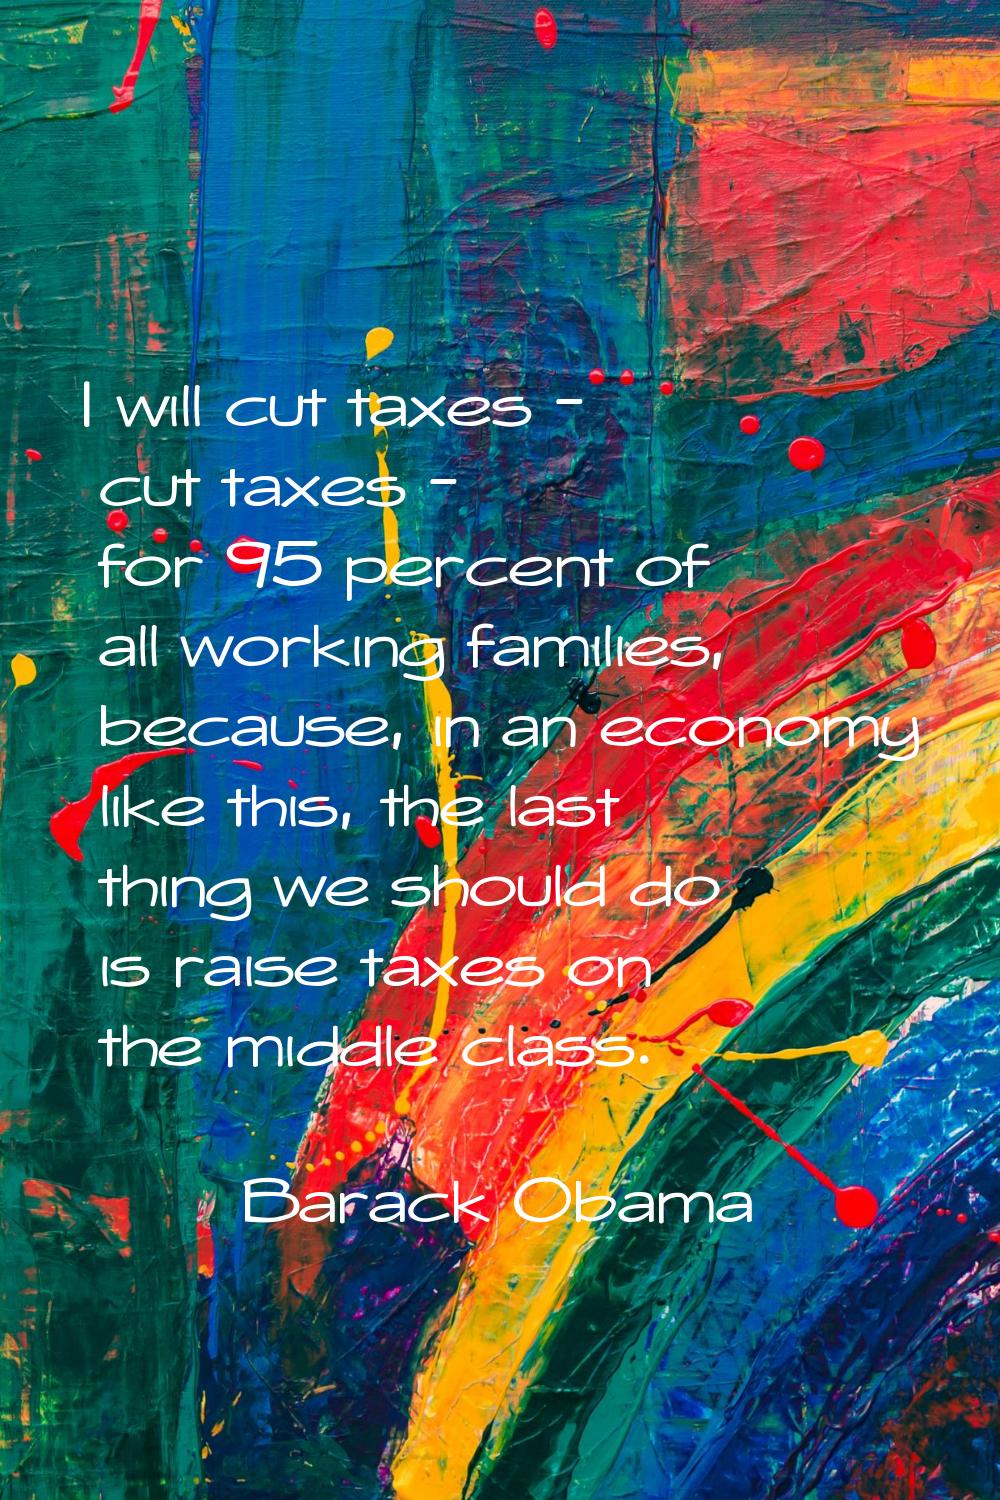 I will cut taxes - cut taxes - for 95 percent of all working families, because, in an economy like 